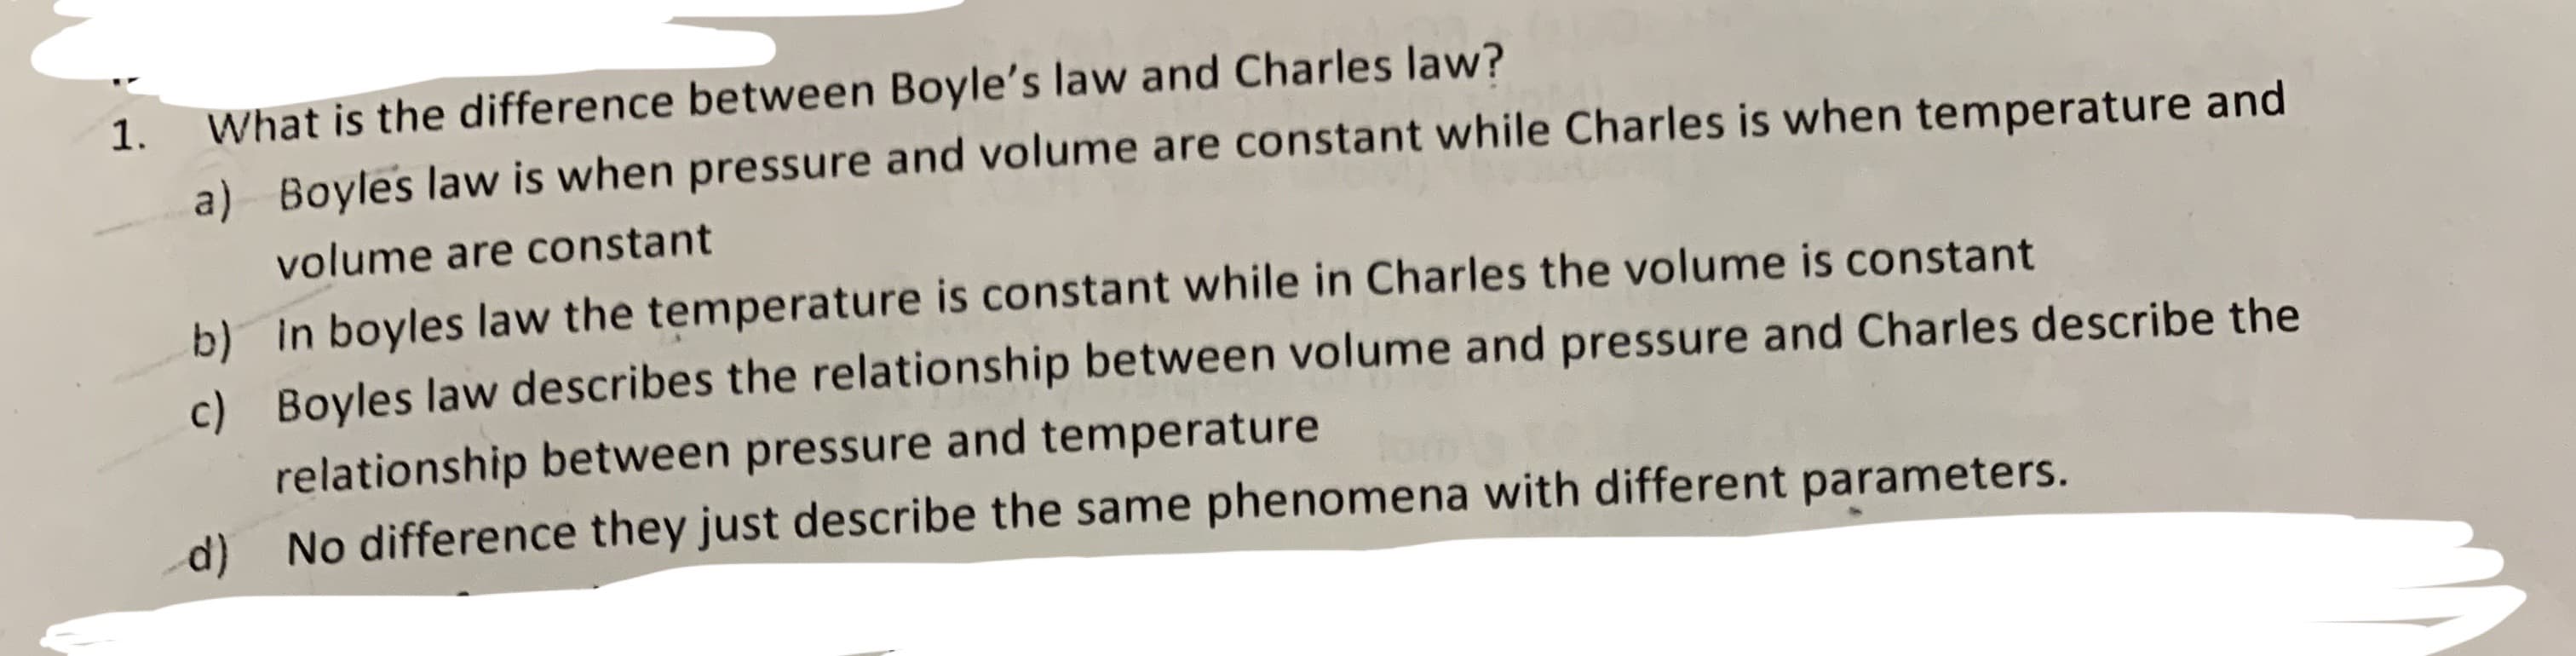 What is the difference between Boyle's law and Charles law?
1.
Boyles law is when pressure and volume are constant while Charles is when temperature and
a)
volume are constant
b) In boyles law the temperature is constant while in Charles the volume is constant
c) Boyles law describes the relationship between volume and pressure and Charles describe the
relationship between pressure and temperature
No difference they just describe the same phenomena with different parameters.
d)
